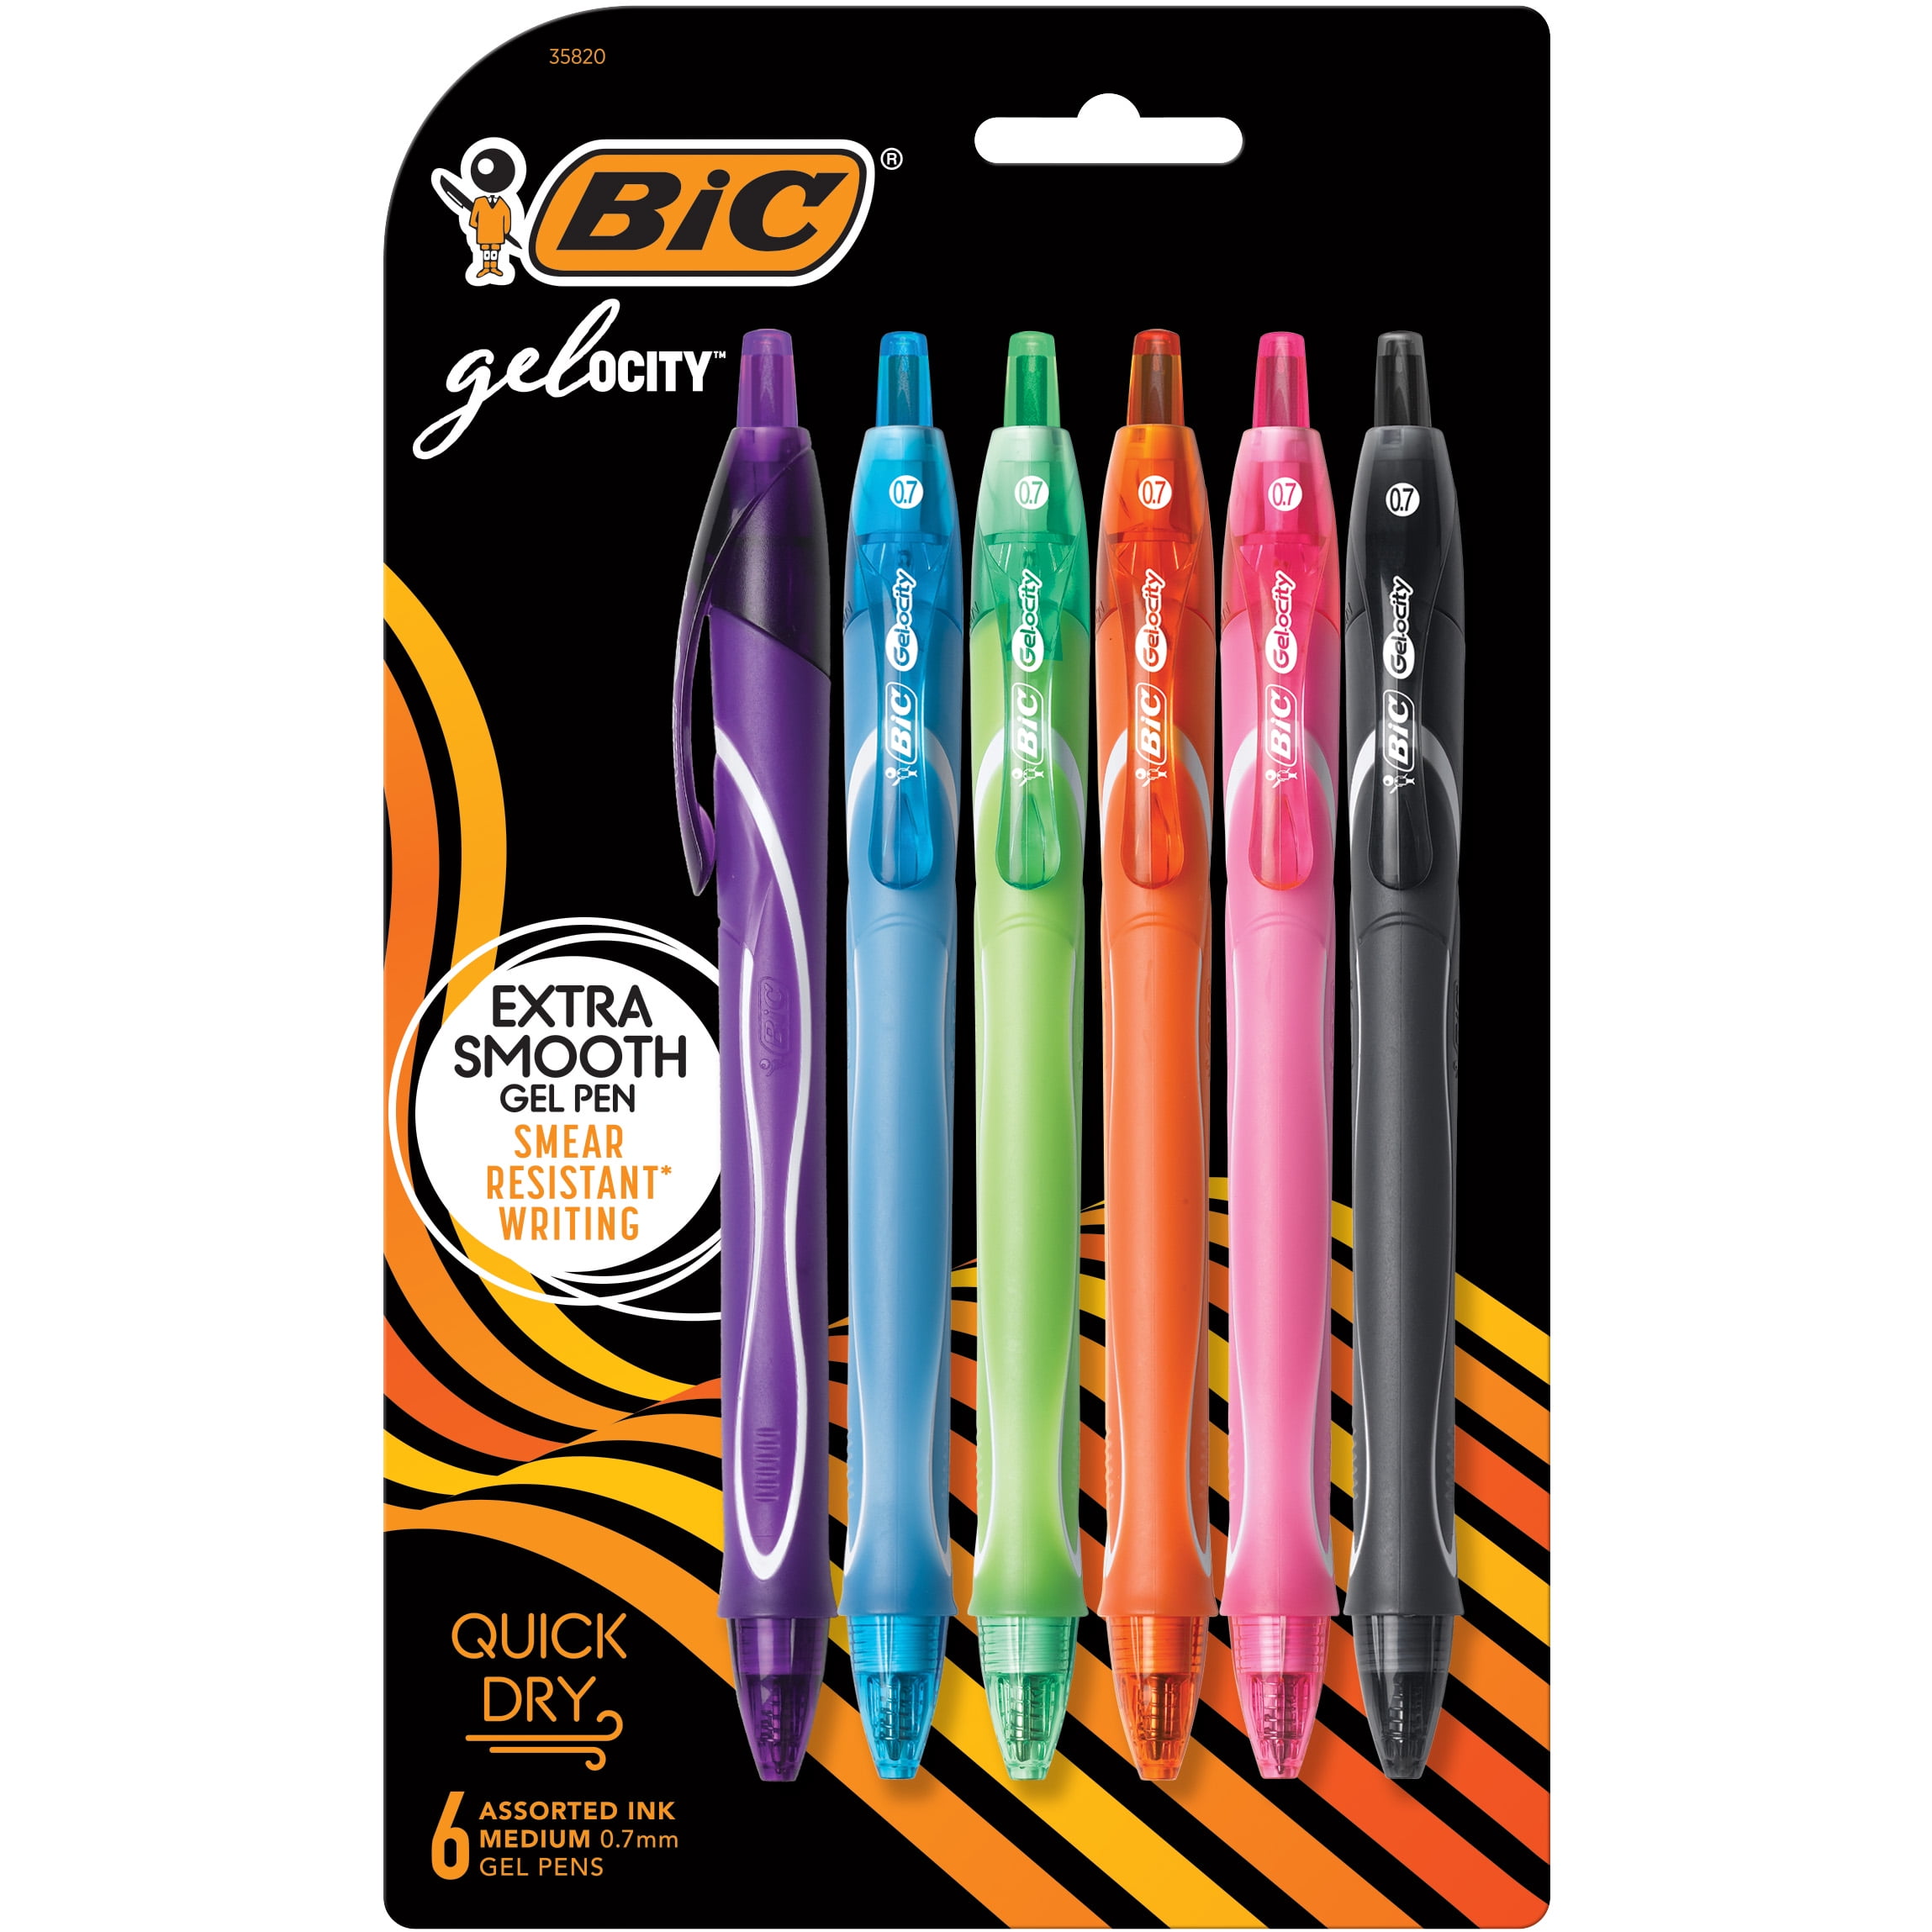 BIC Gel-ocity Quick Dry Special Edition Fashion Gel Pen with Stand, Medium  Point (0.7mm), Assorted Colors, For a Smooth Writing Experience, 6-Count